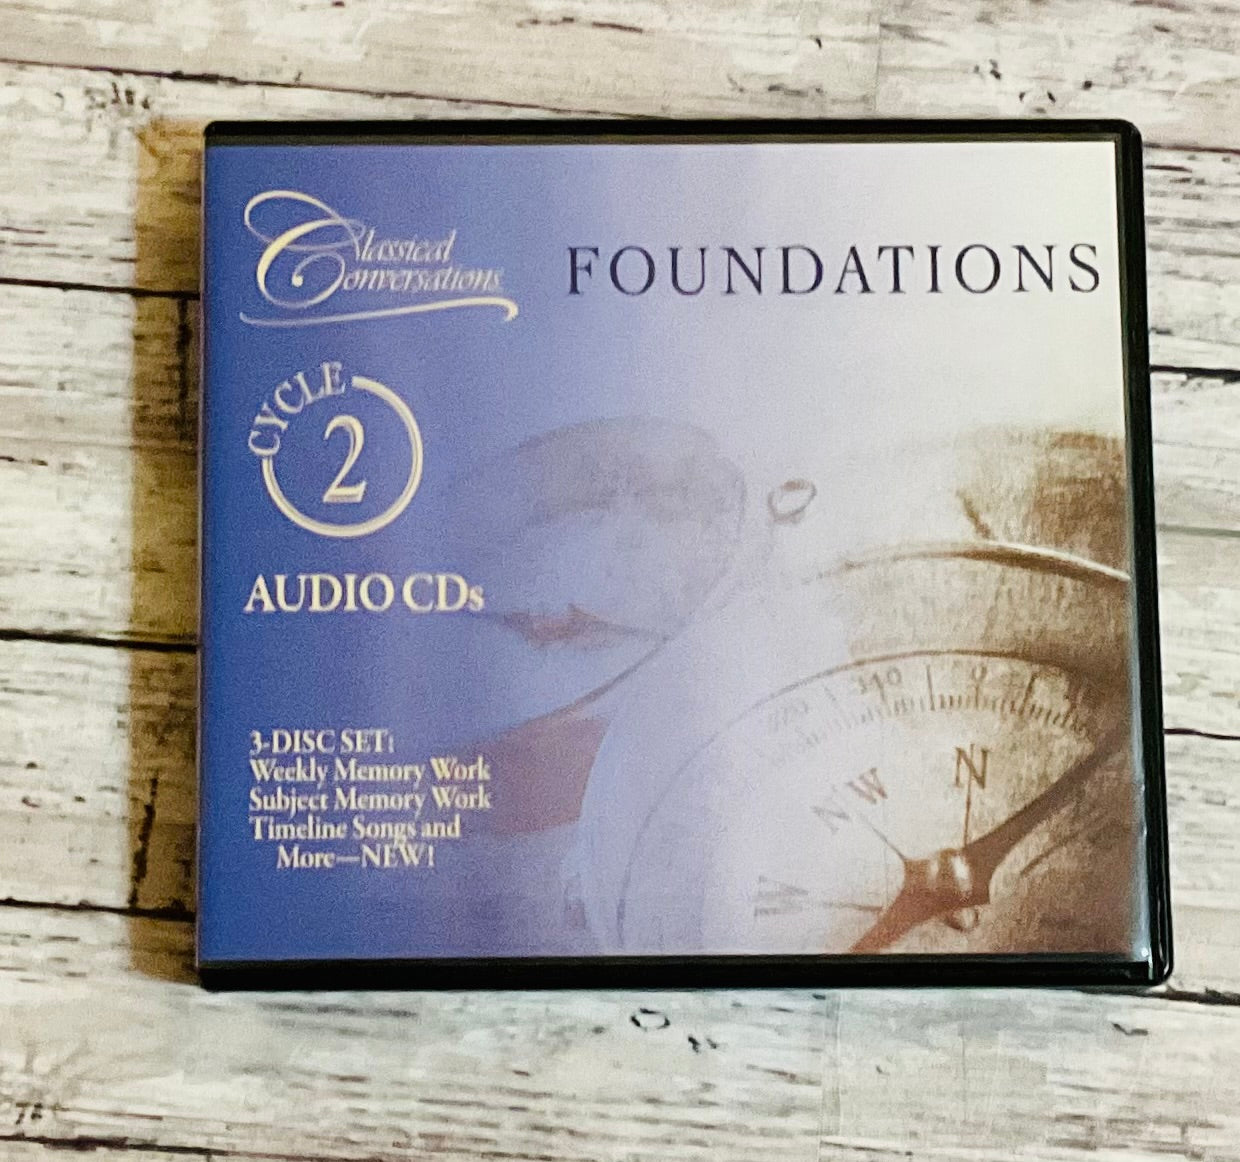 Classical Conversations Cycle 2 Foundations Audio CD - 4th Edition - Anchored Homeschool Resource Center